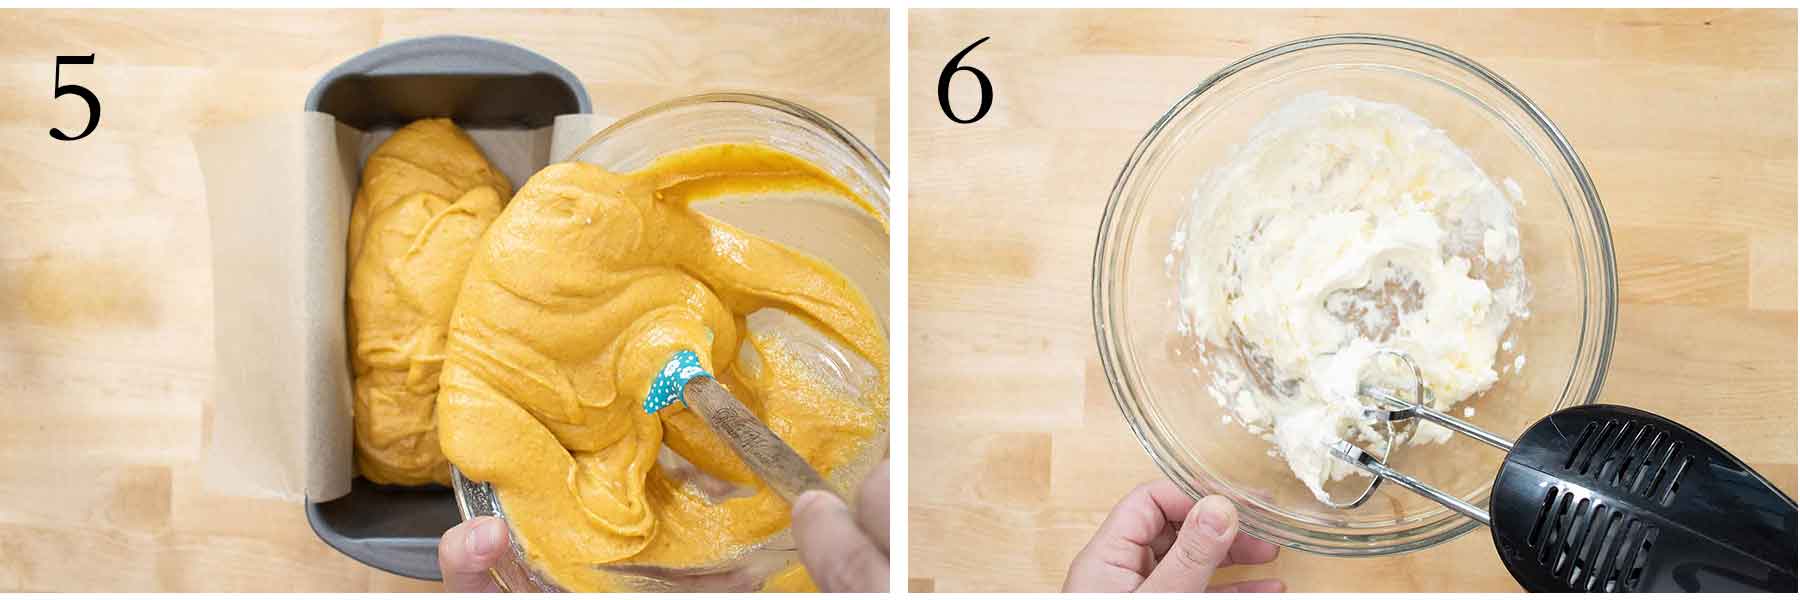 steps 5-6 on how to make a pumpkin bread and cream cheese frosting.